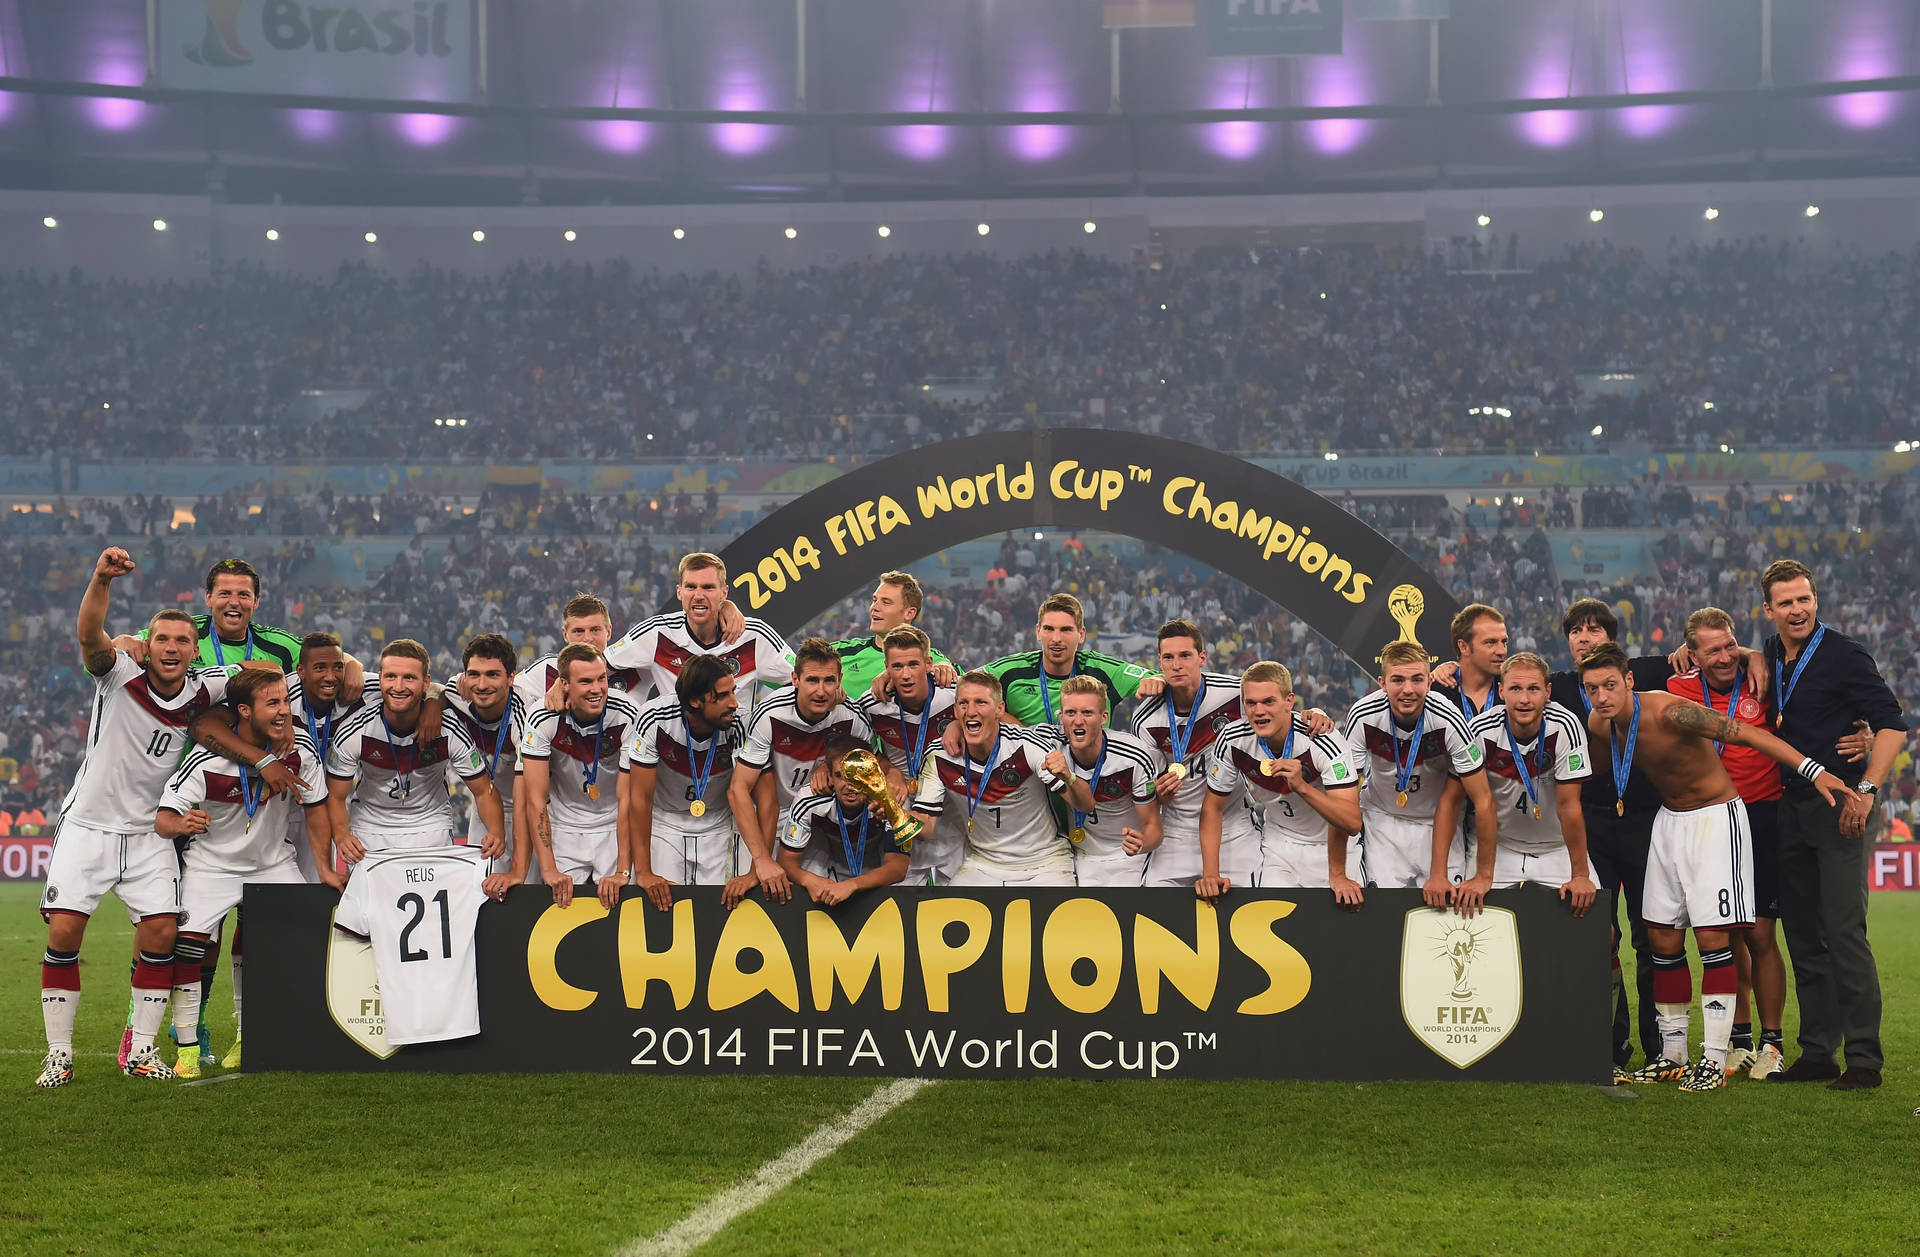 2014 Fifa World Cup Champions Background